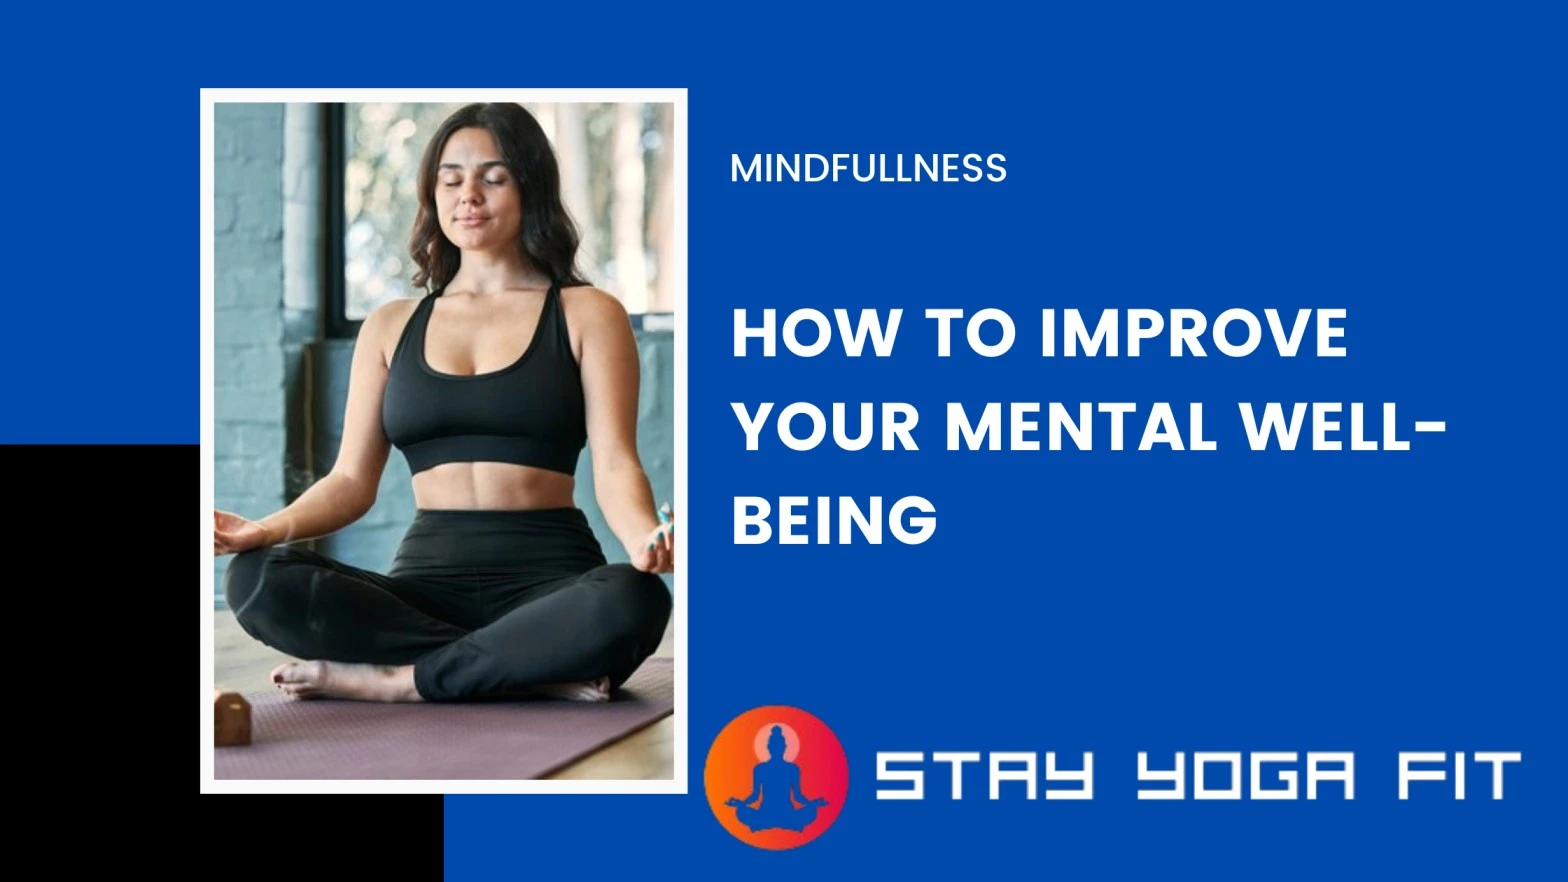 How to improve your mental well-being